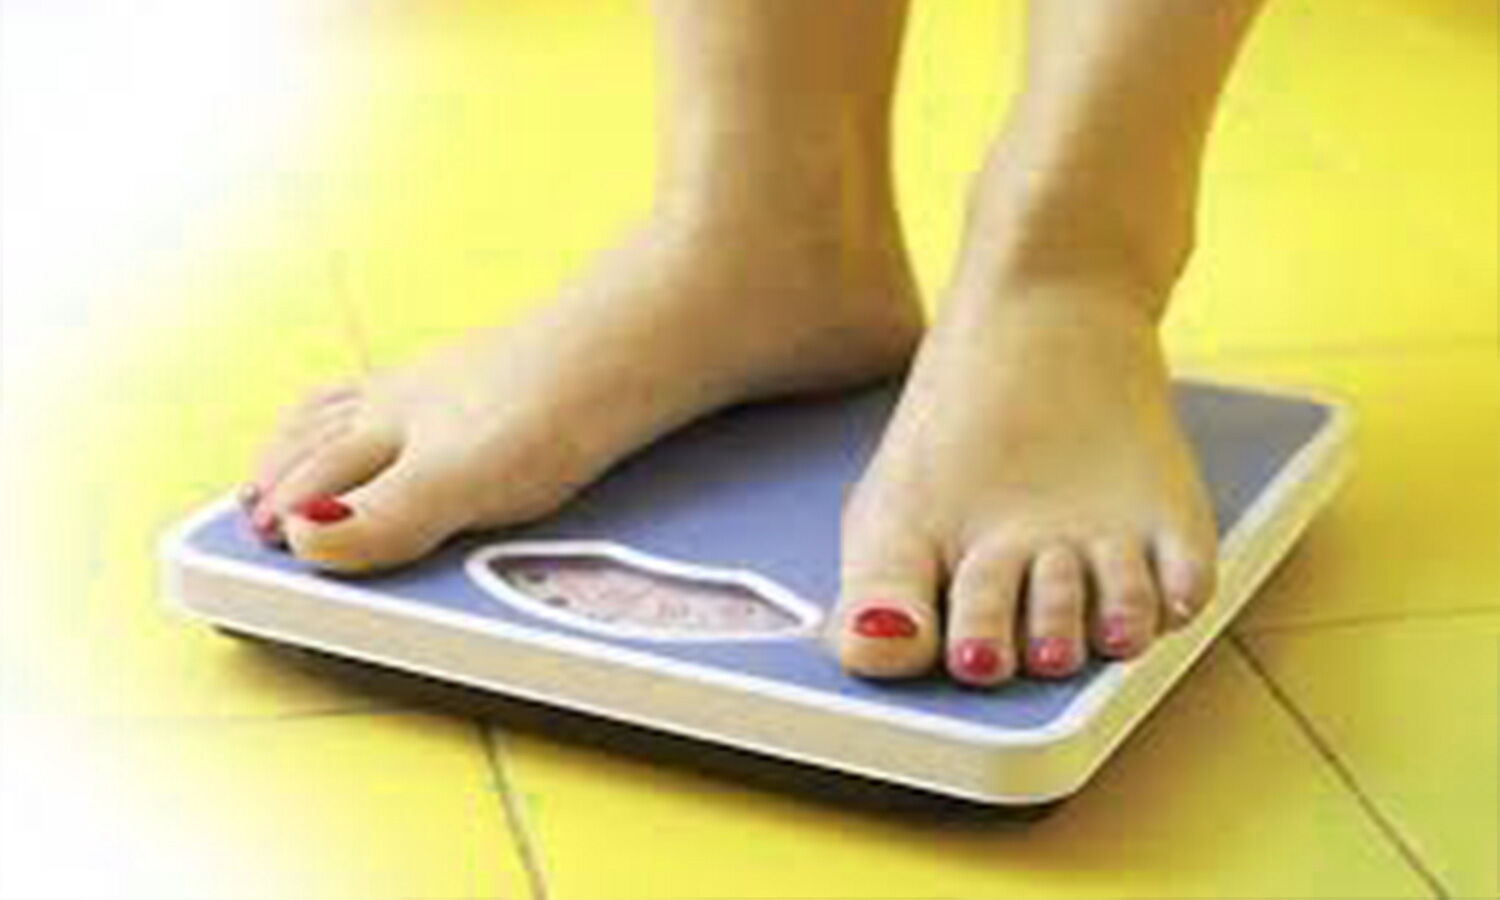 Hormones have been found to stop hunger and lead to weight loss